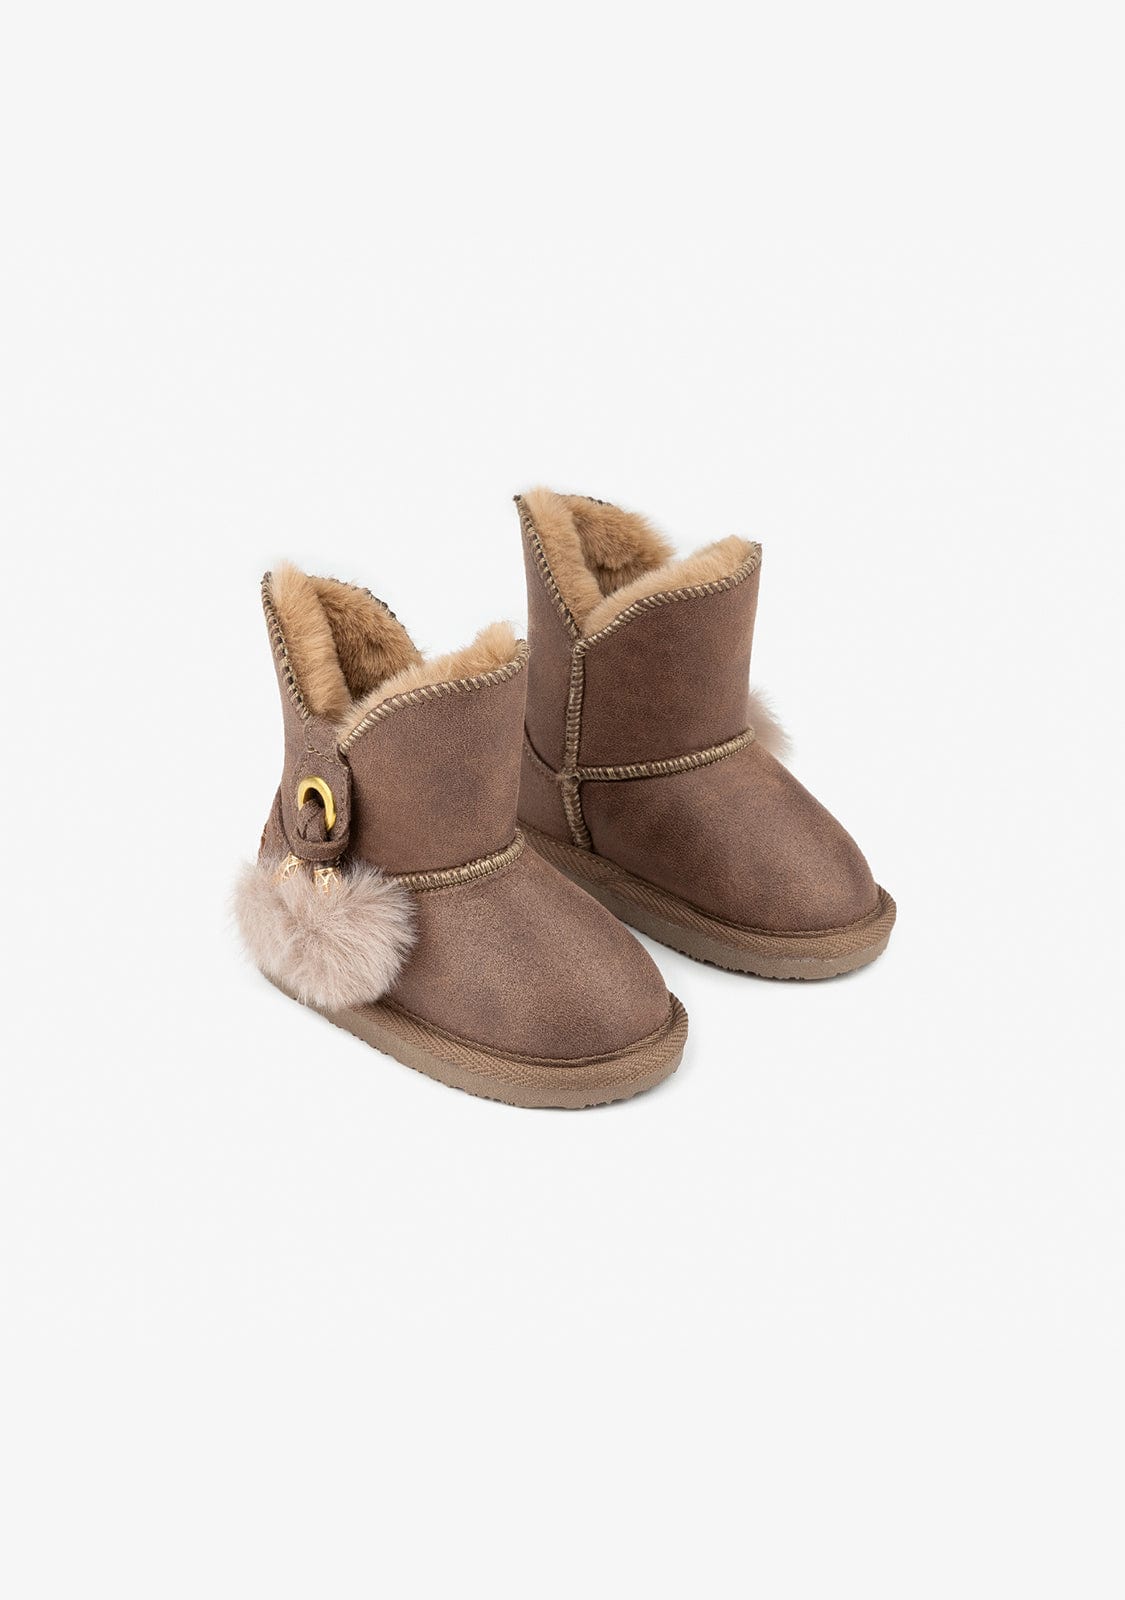 OSITO Shoes Baby's Taupe Pompon Australian Boots